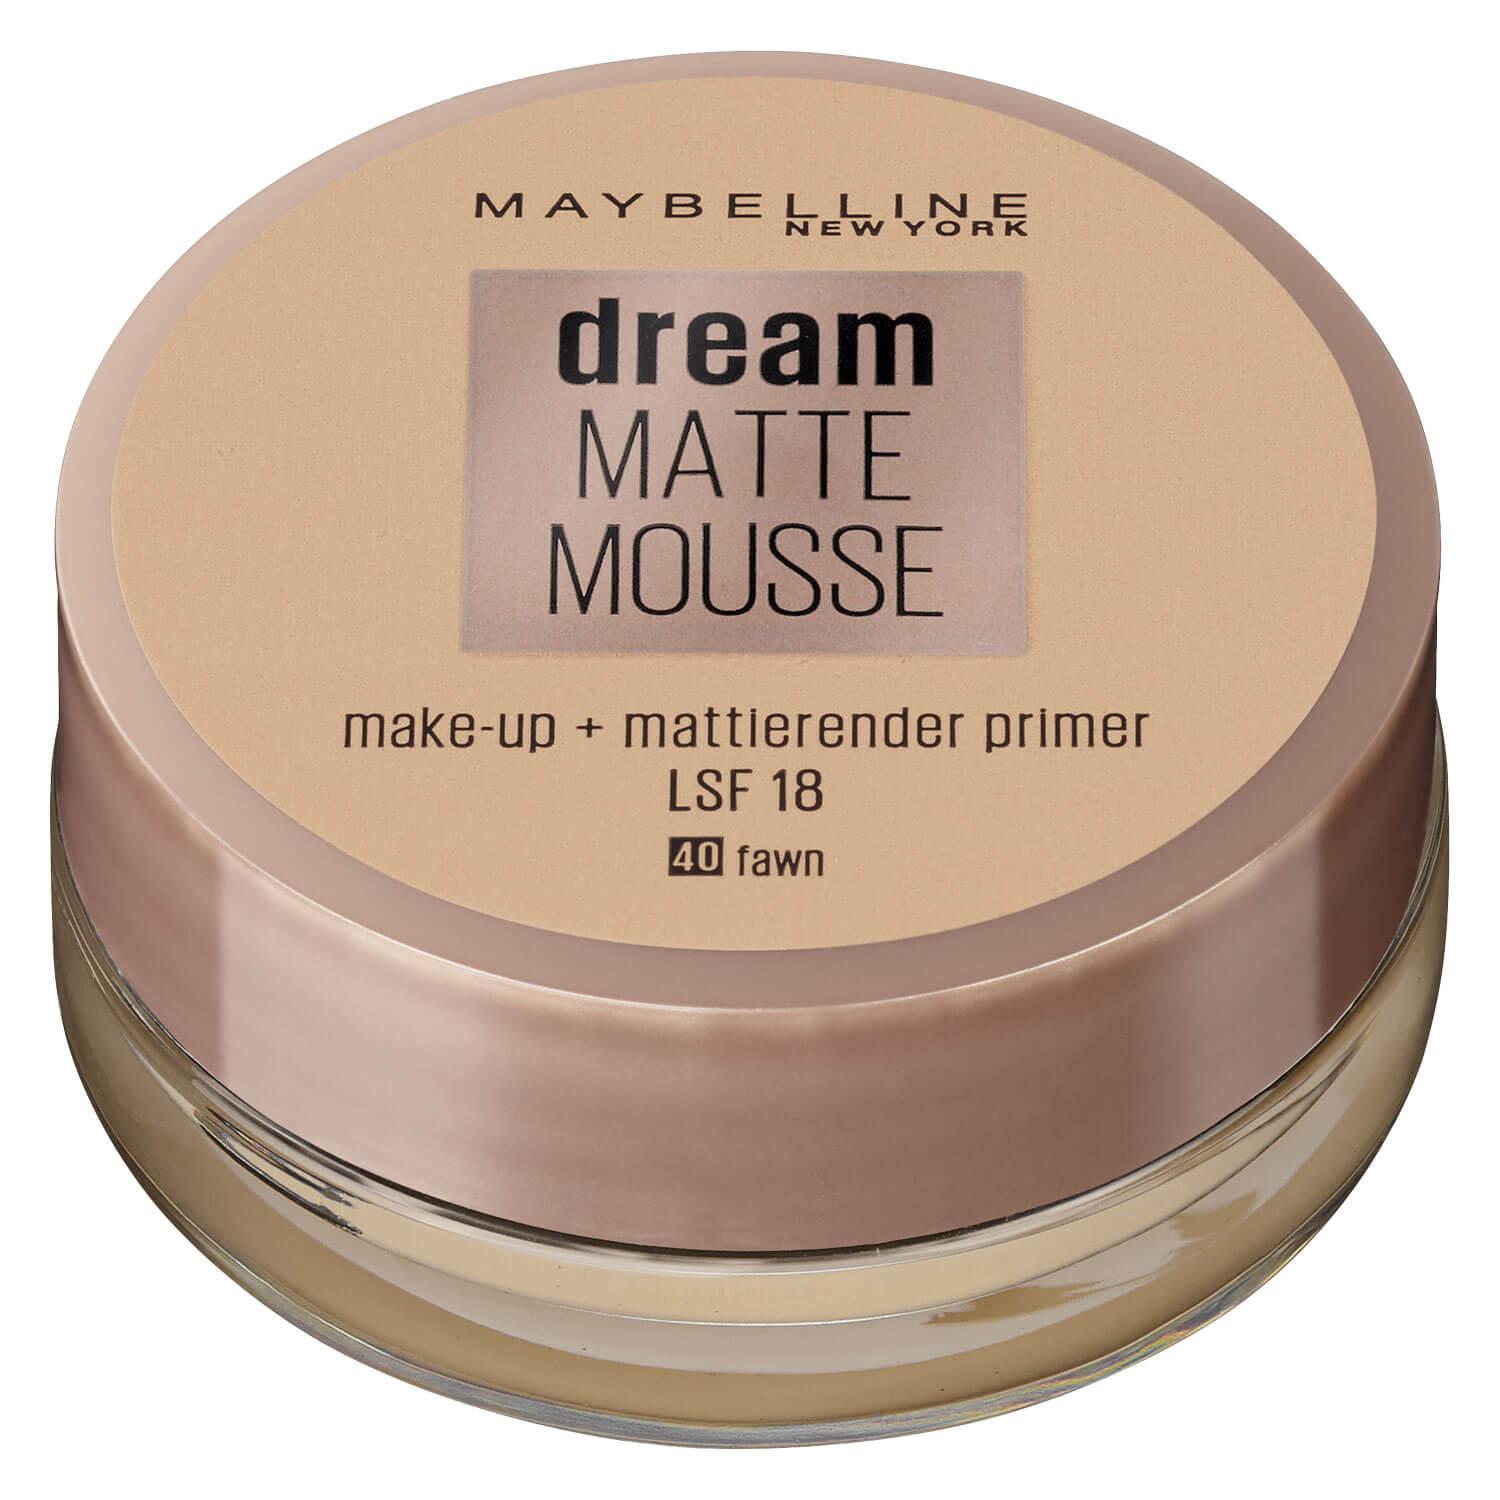 Maybelline NY Teint - Dream Matte Mousse Make-up 40 Fawn